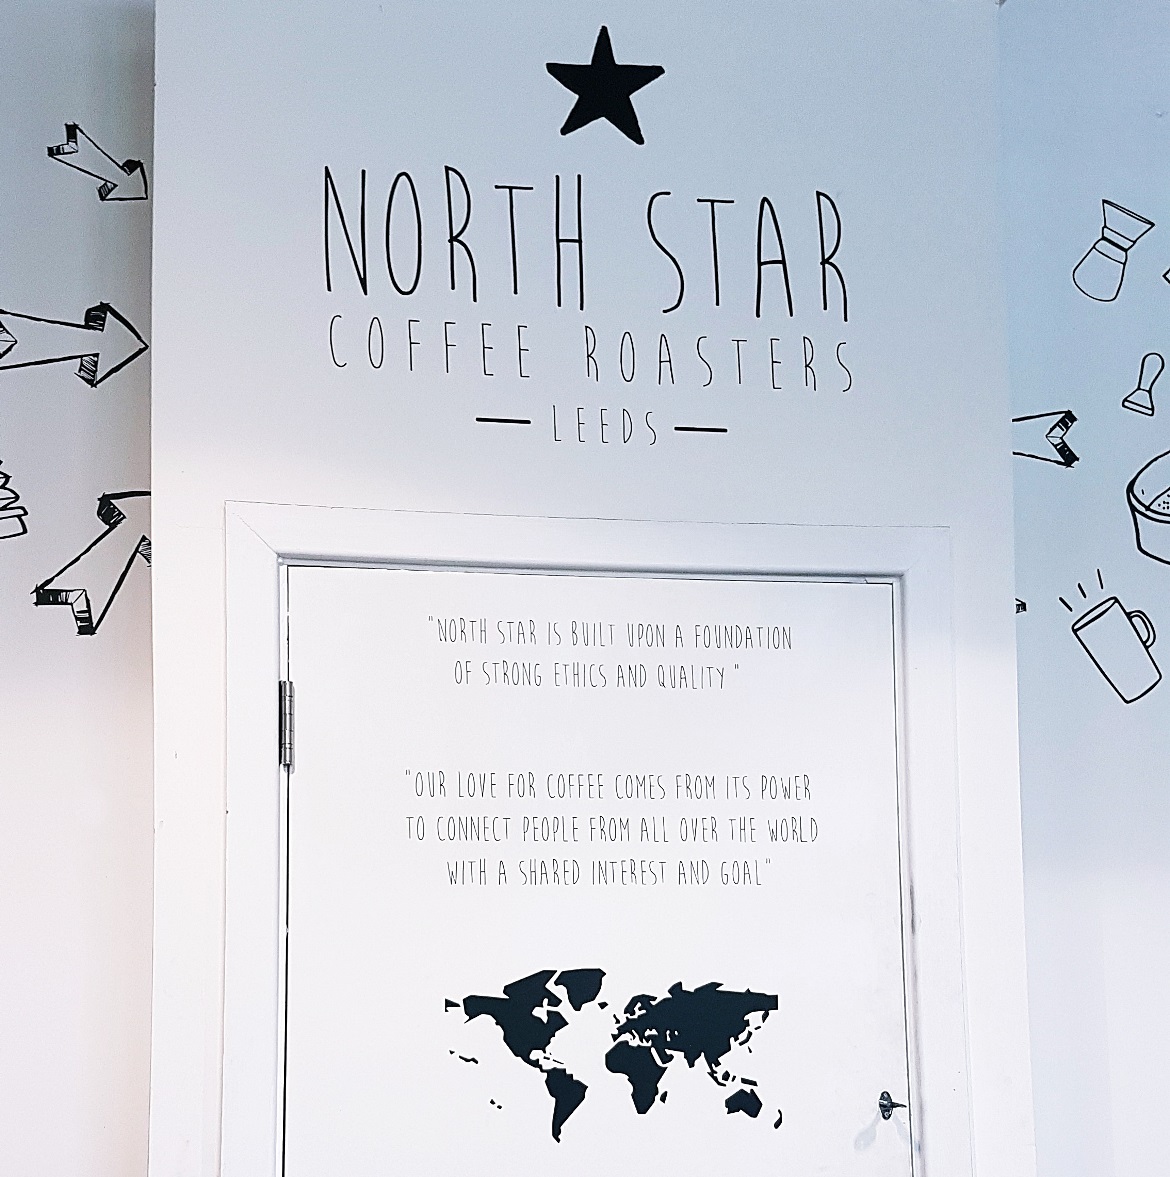 Decor on the wall of North Star Coffee Roastery - Review of North Star Coffee Shop by BeckyBecky Blogs